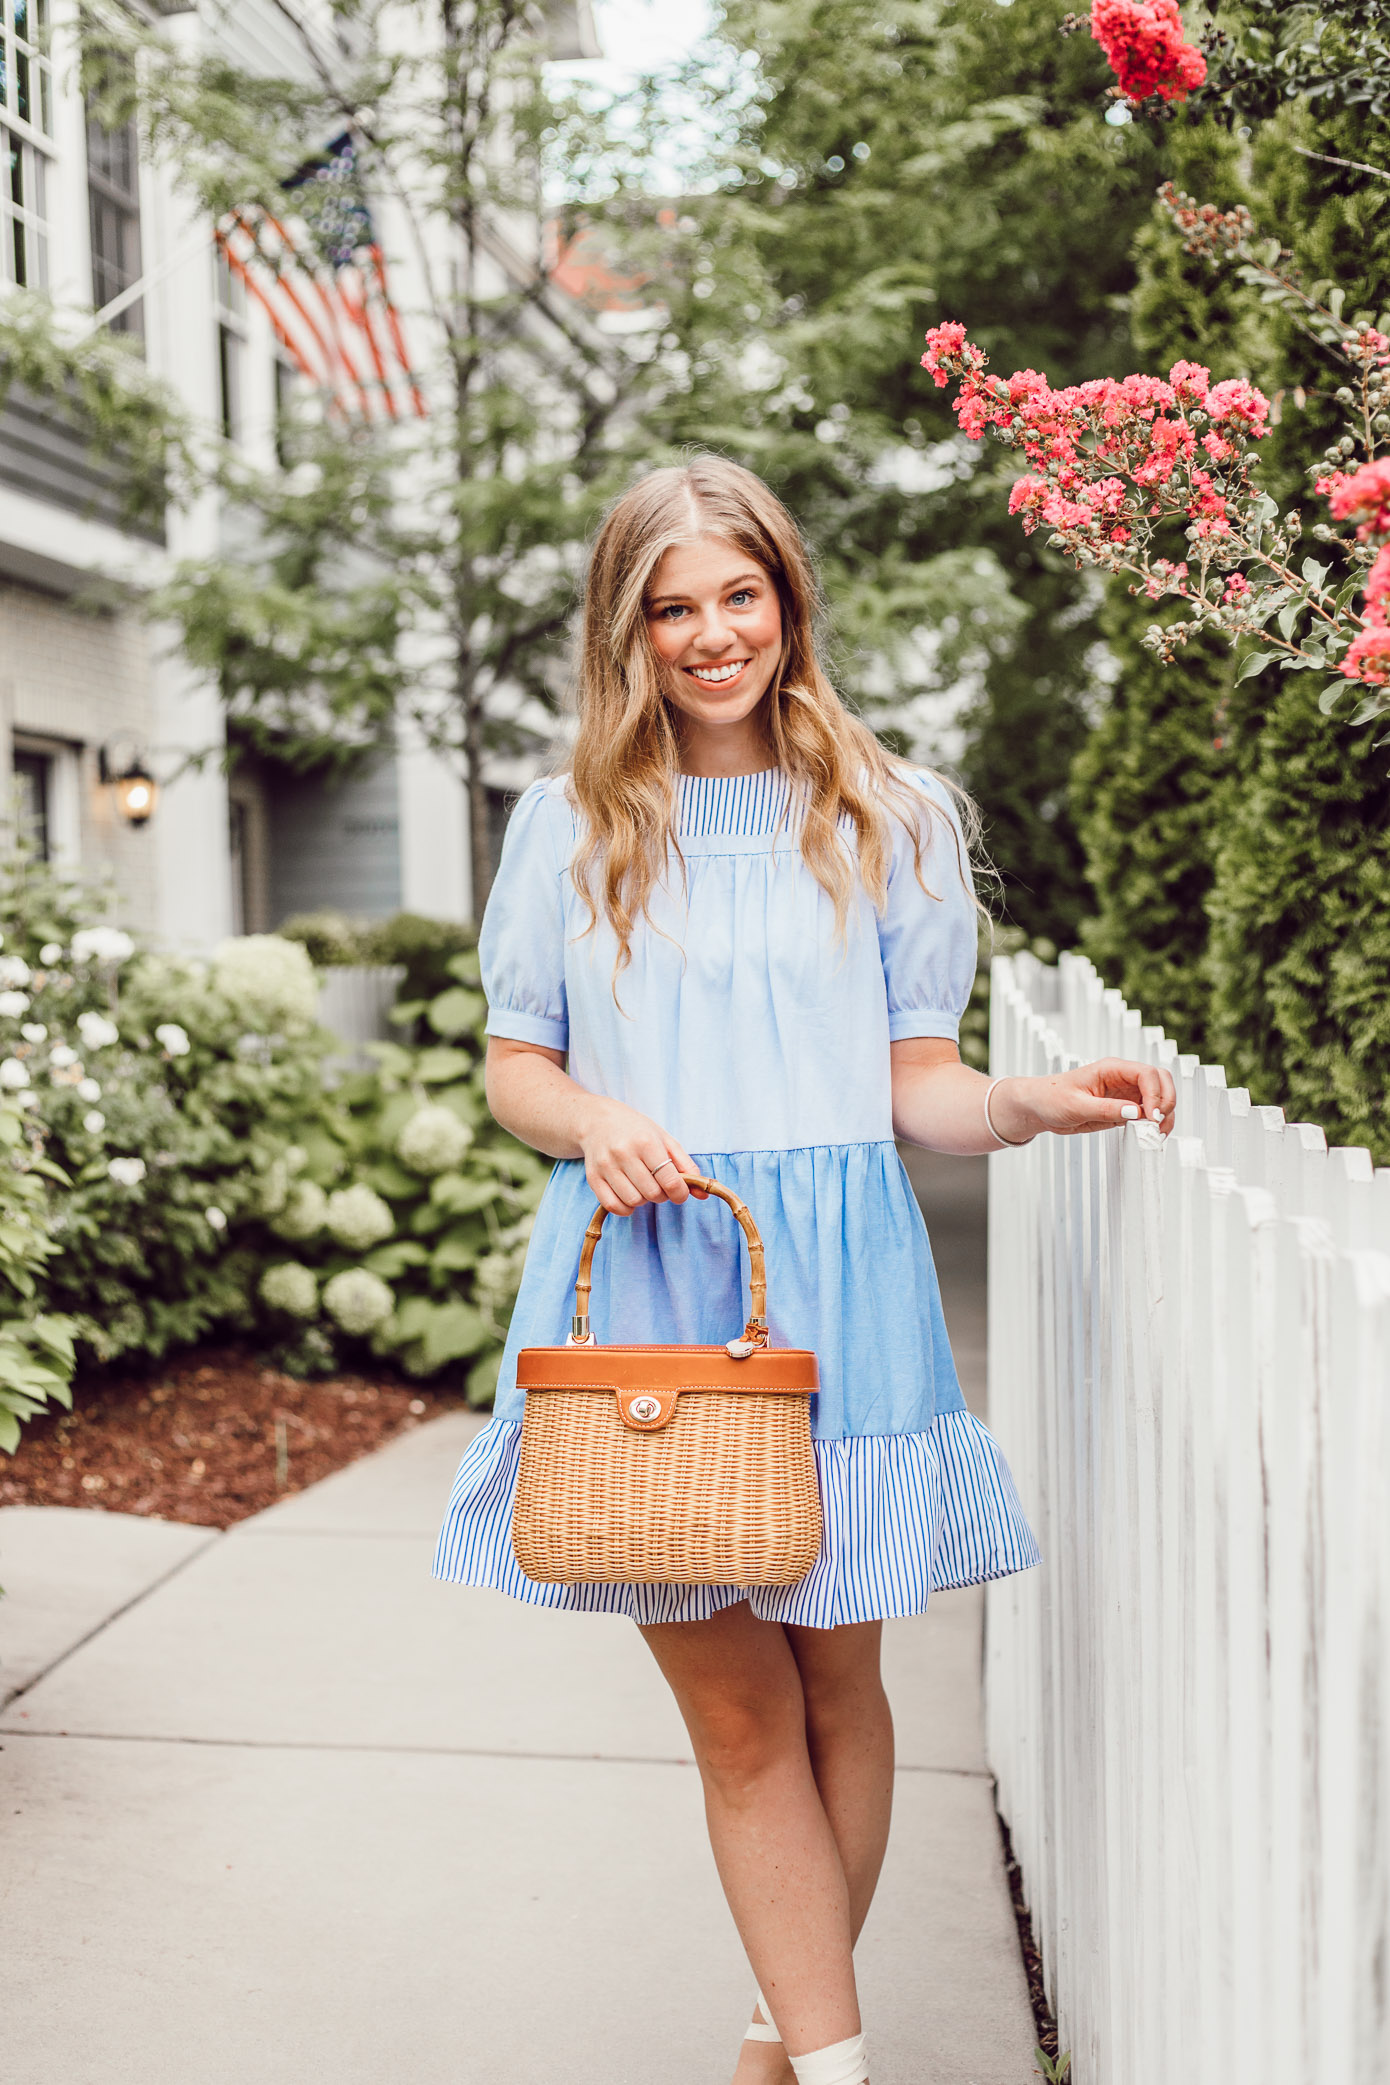 English Factory Summer Dress in Charlotte, NC // Blue and White Dress for Summer, Structured Basket Bag | Louella Reese